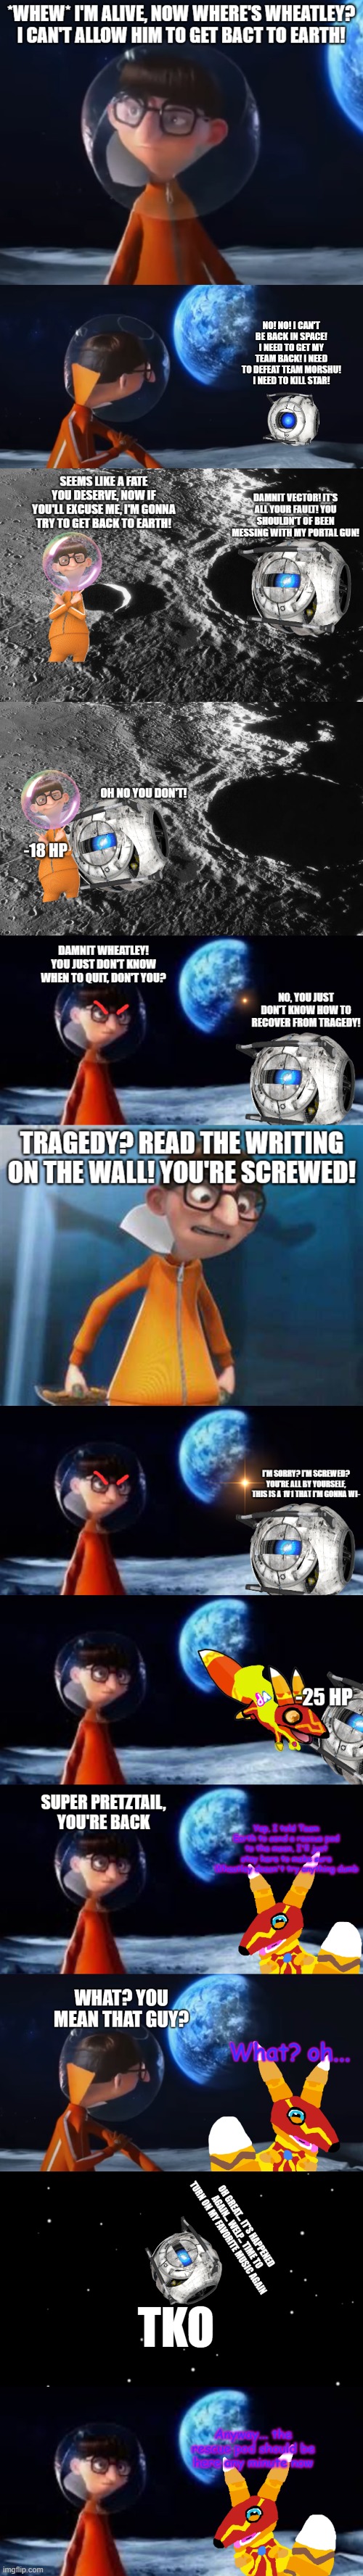 The End of Wheatley Part 6A | made w/ Imgflip meme maker